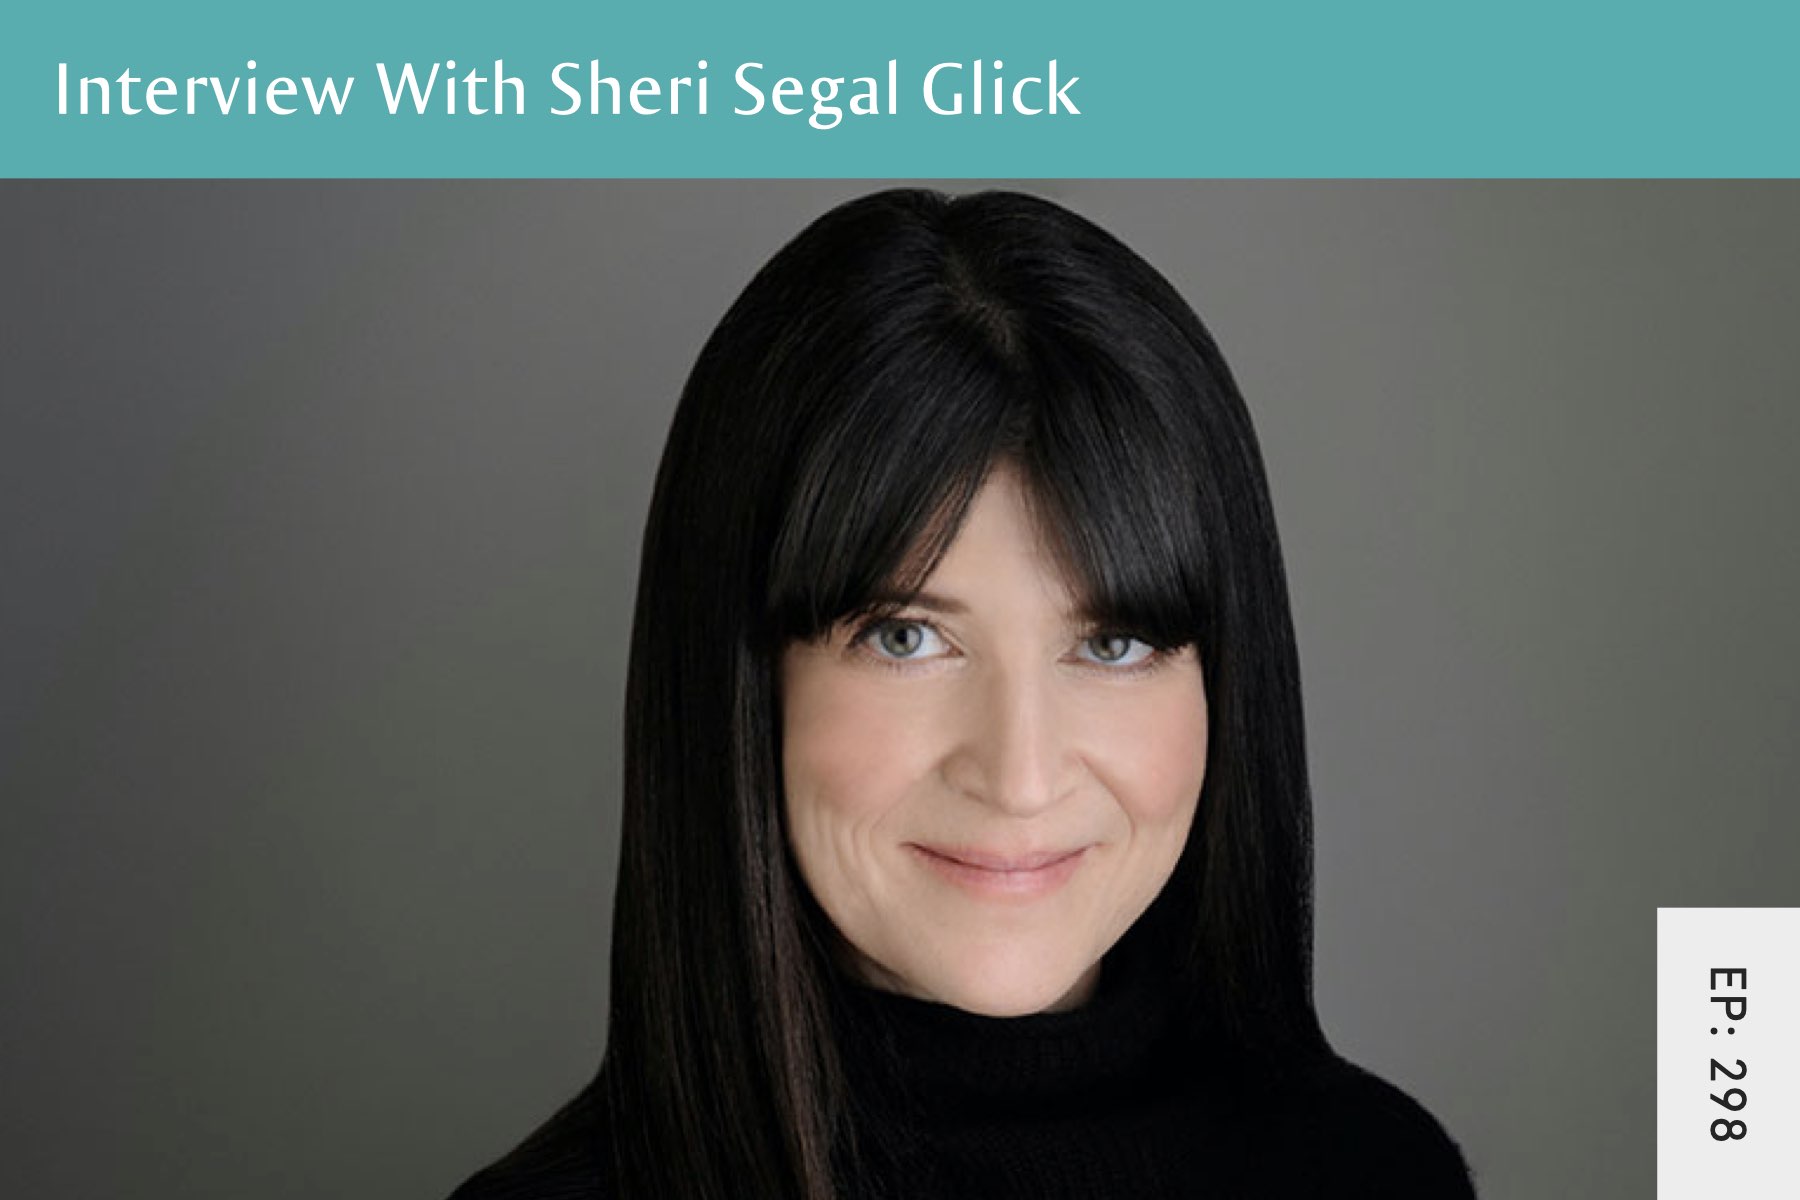 298: Overcoming Calorie Counting, Compulsive Exercise, Shame and Secrecy With Sheri Segal Glick - Seven Health: Eating Disorder Recovery and Anti Diet Nutritionist